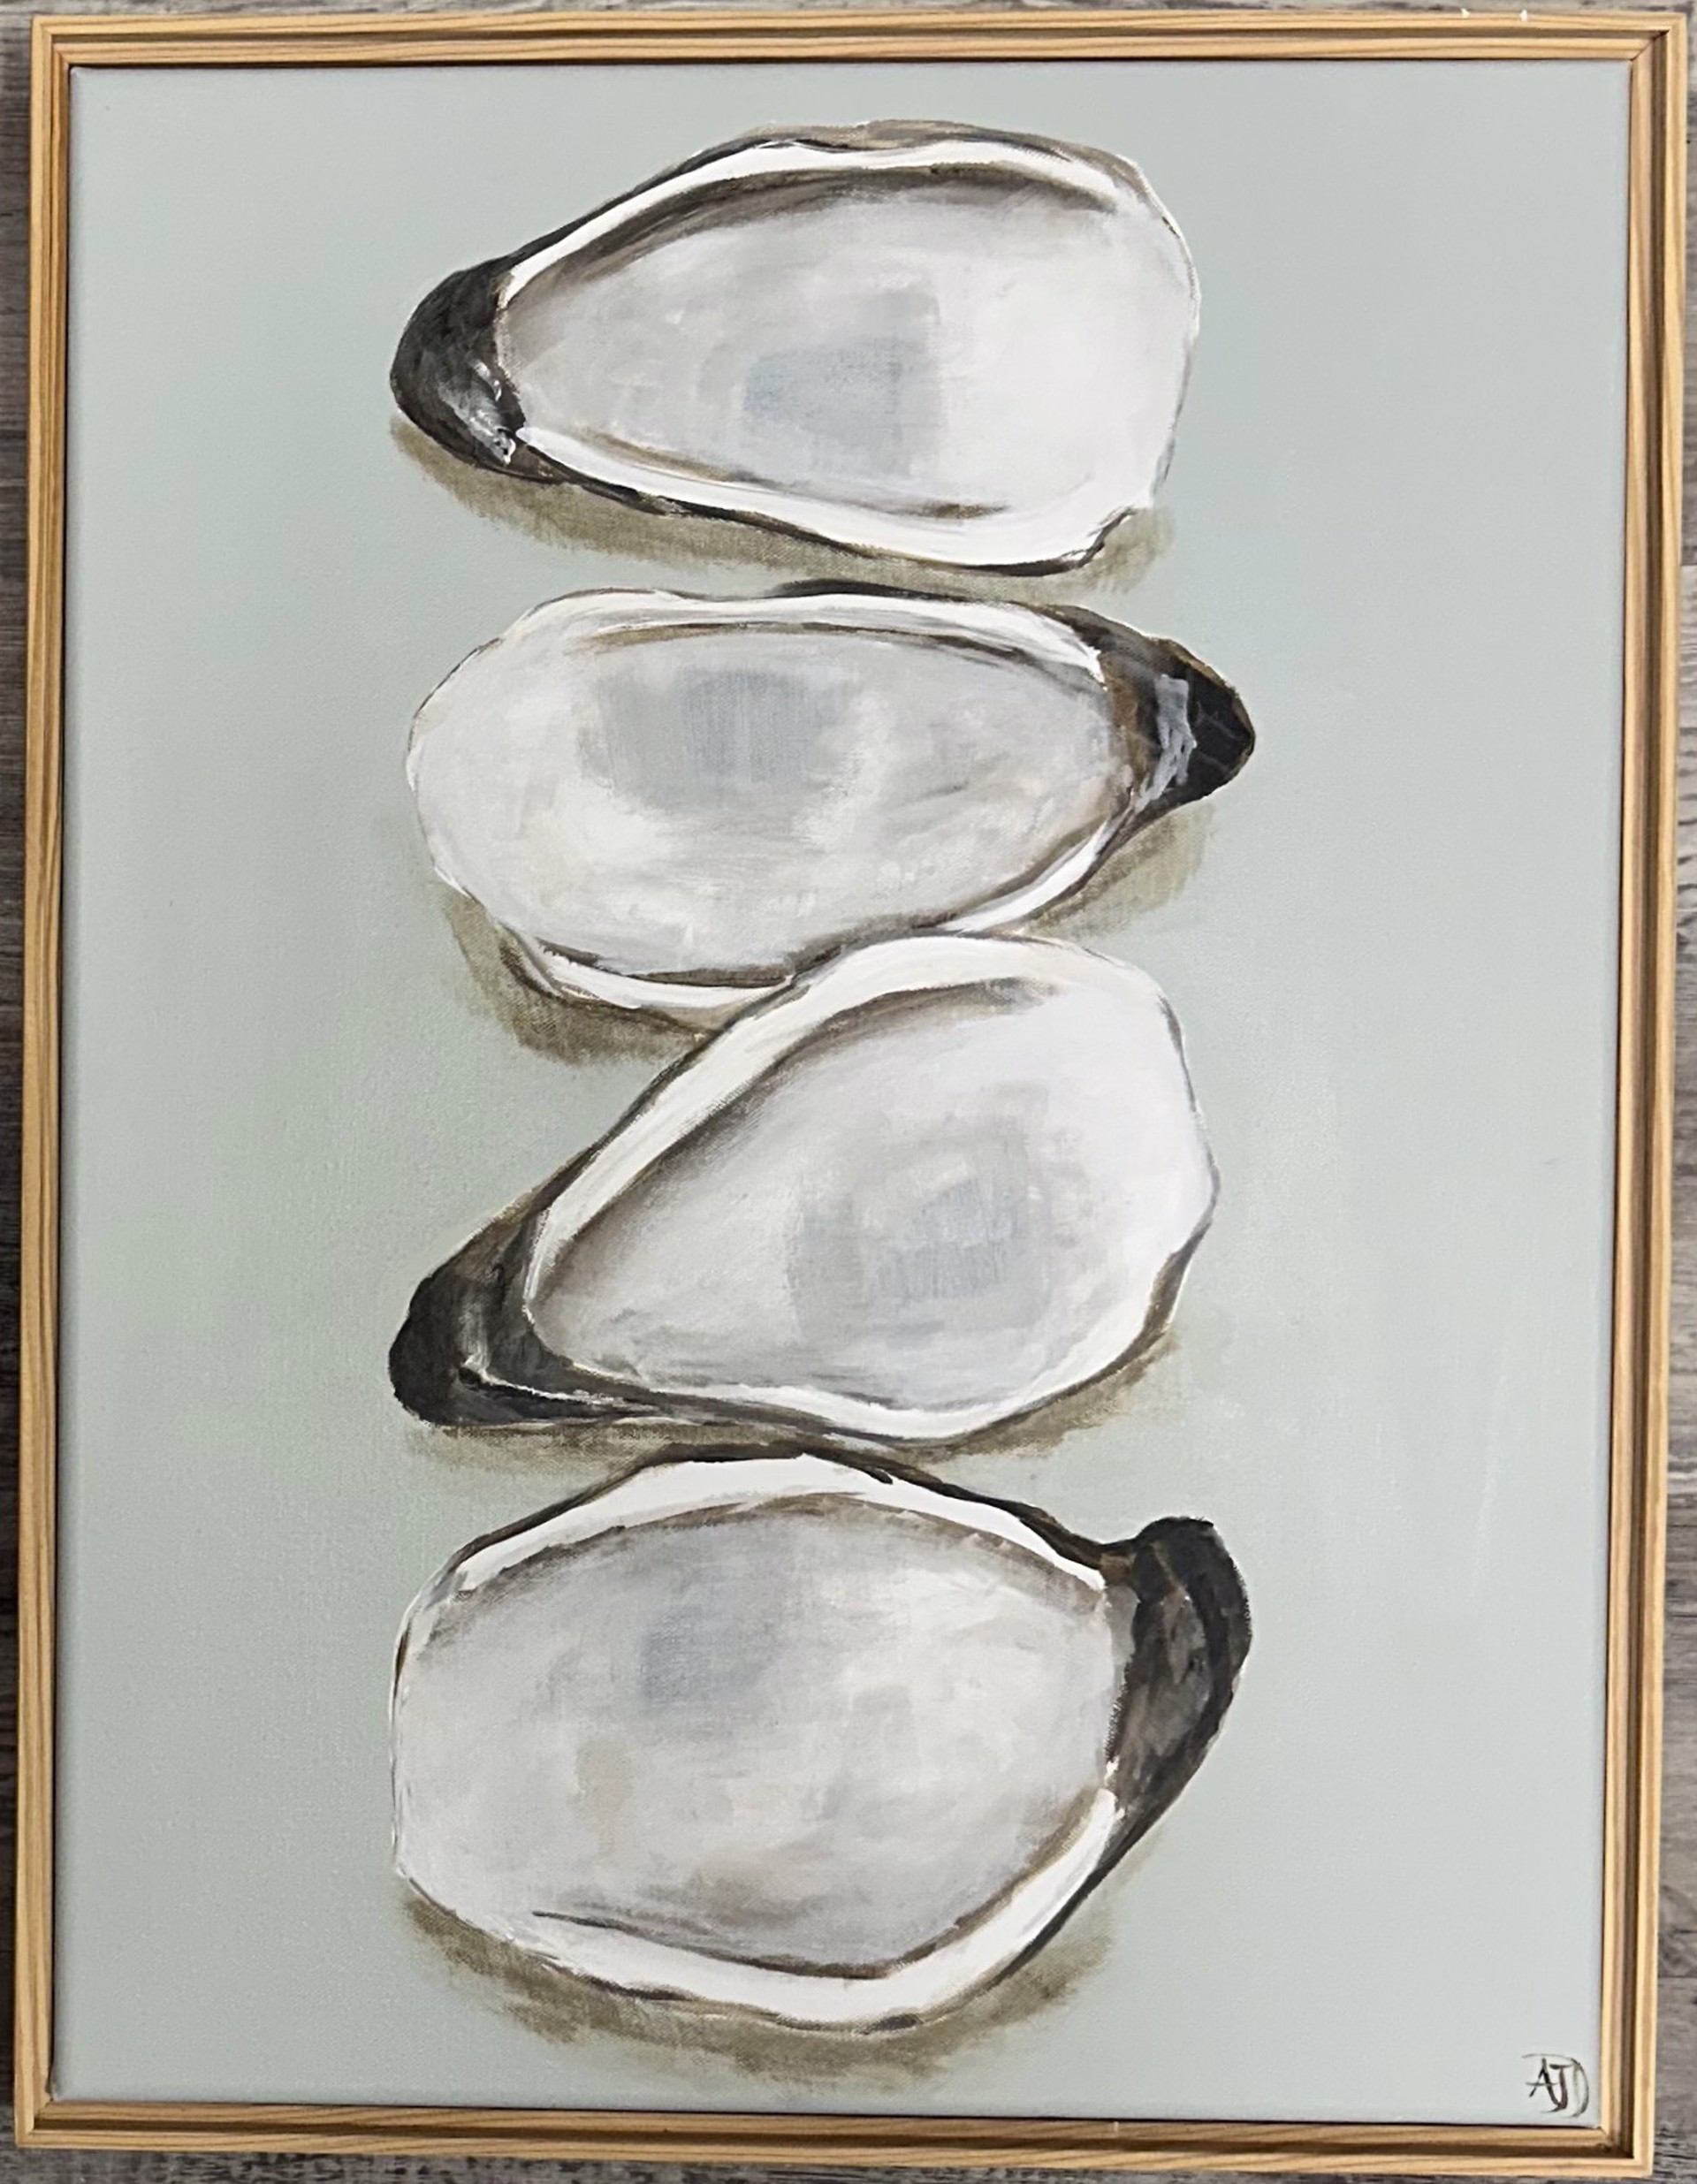 4 Oysters by Amy Duke